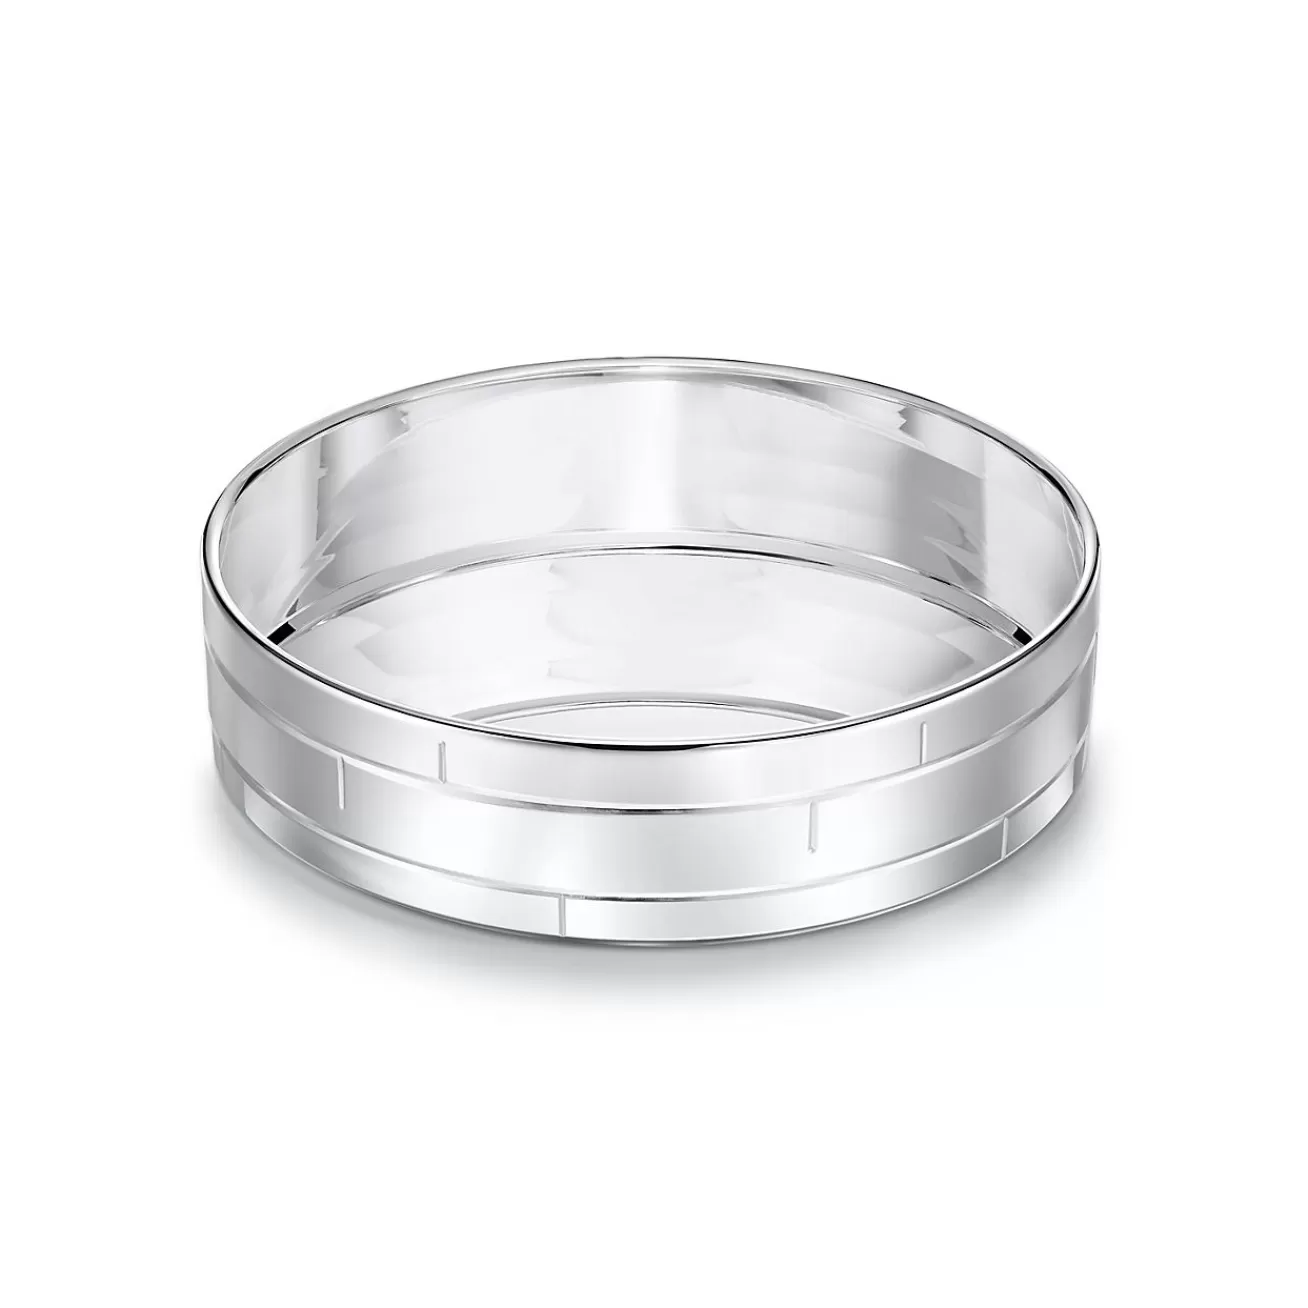 Tiffany & Co. Modern Bamboo Bowl in Sterling Silver | ^ Tableware